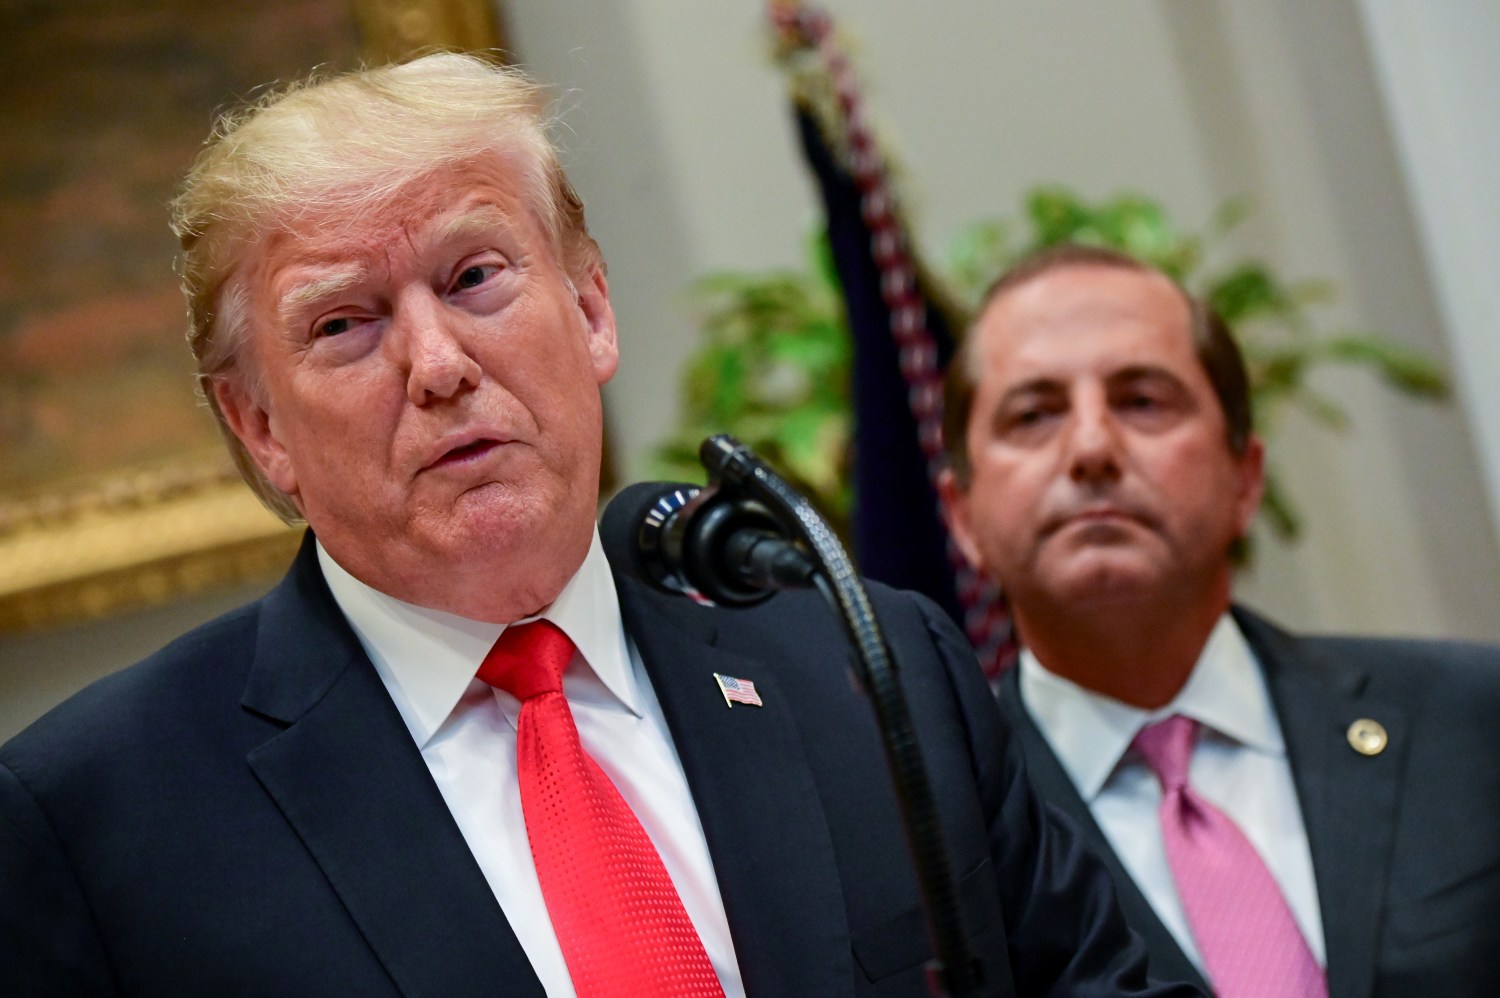 U.S. President Donald Trump, joined by Health and Human Services Secretary Alex Azar, announces opioid response grants to state governments in the Roosevelt Room of the White House in Washington, U.S. September 4, 2019. REUTERS/Erin Scott